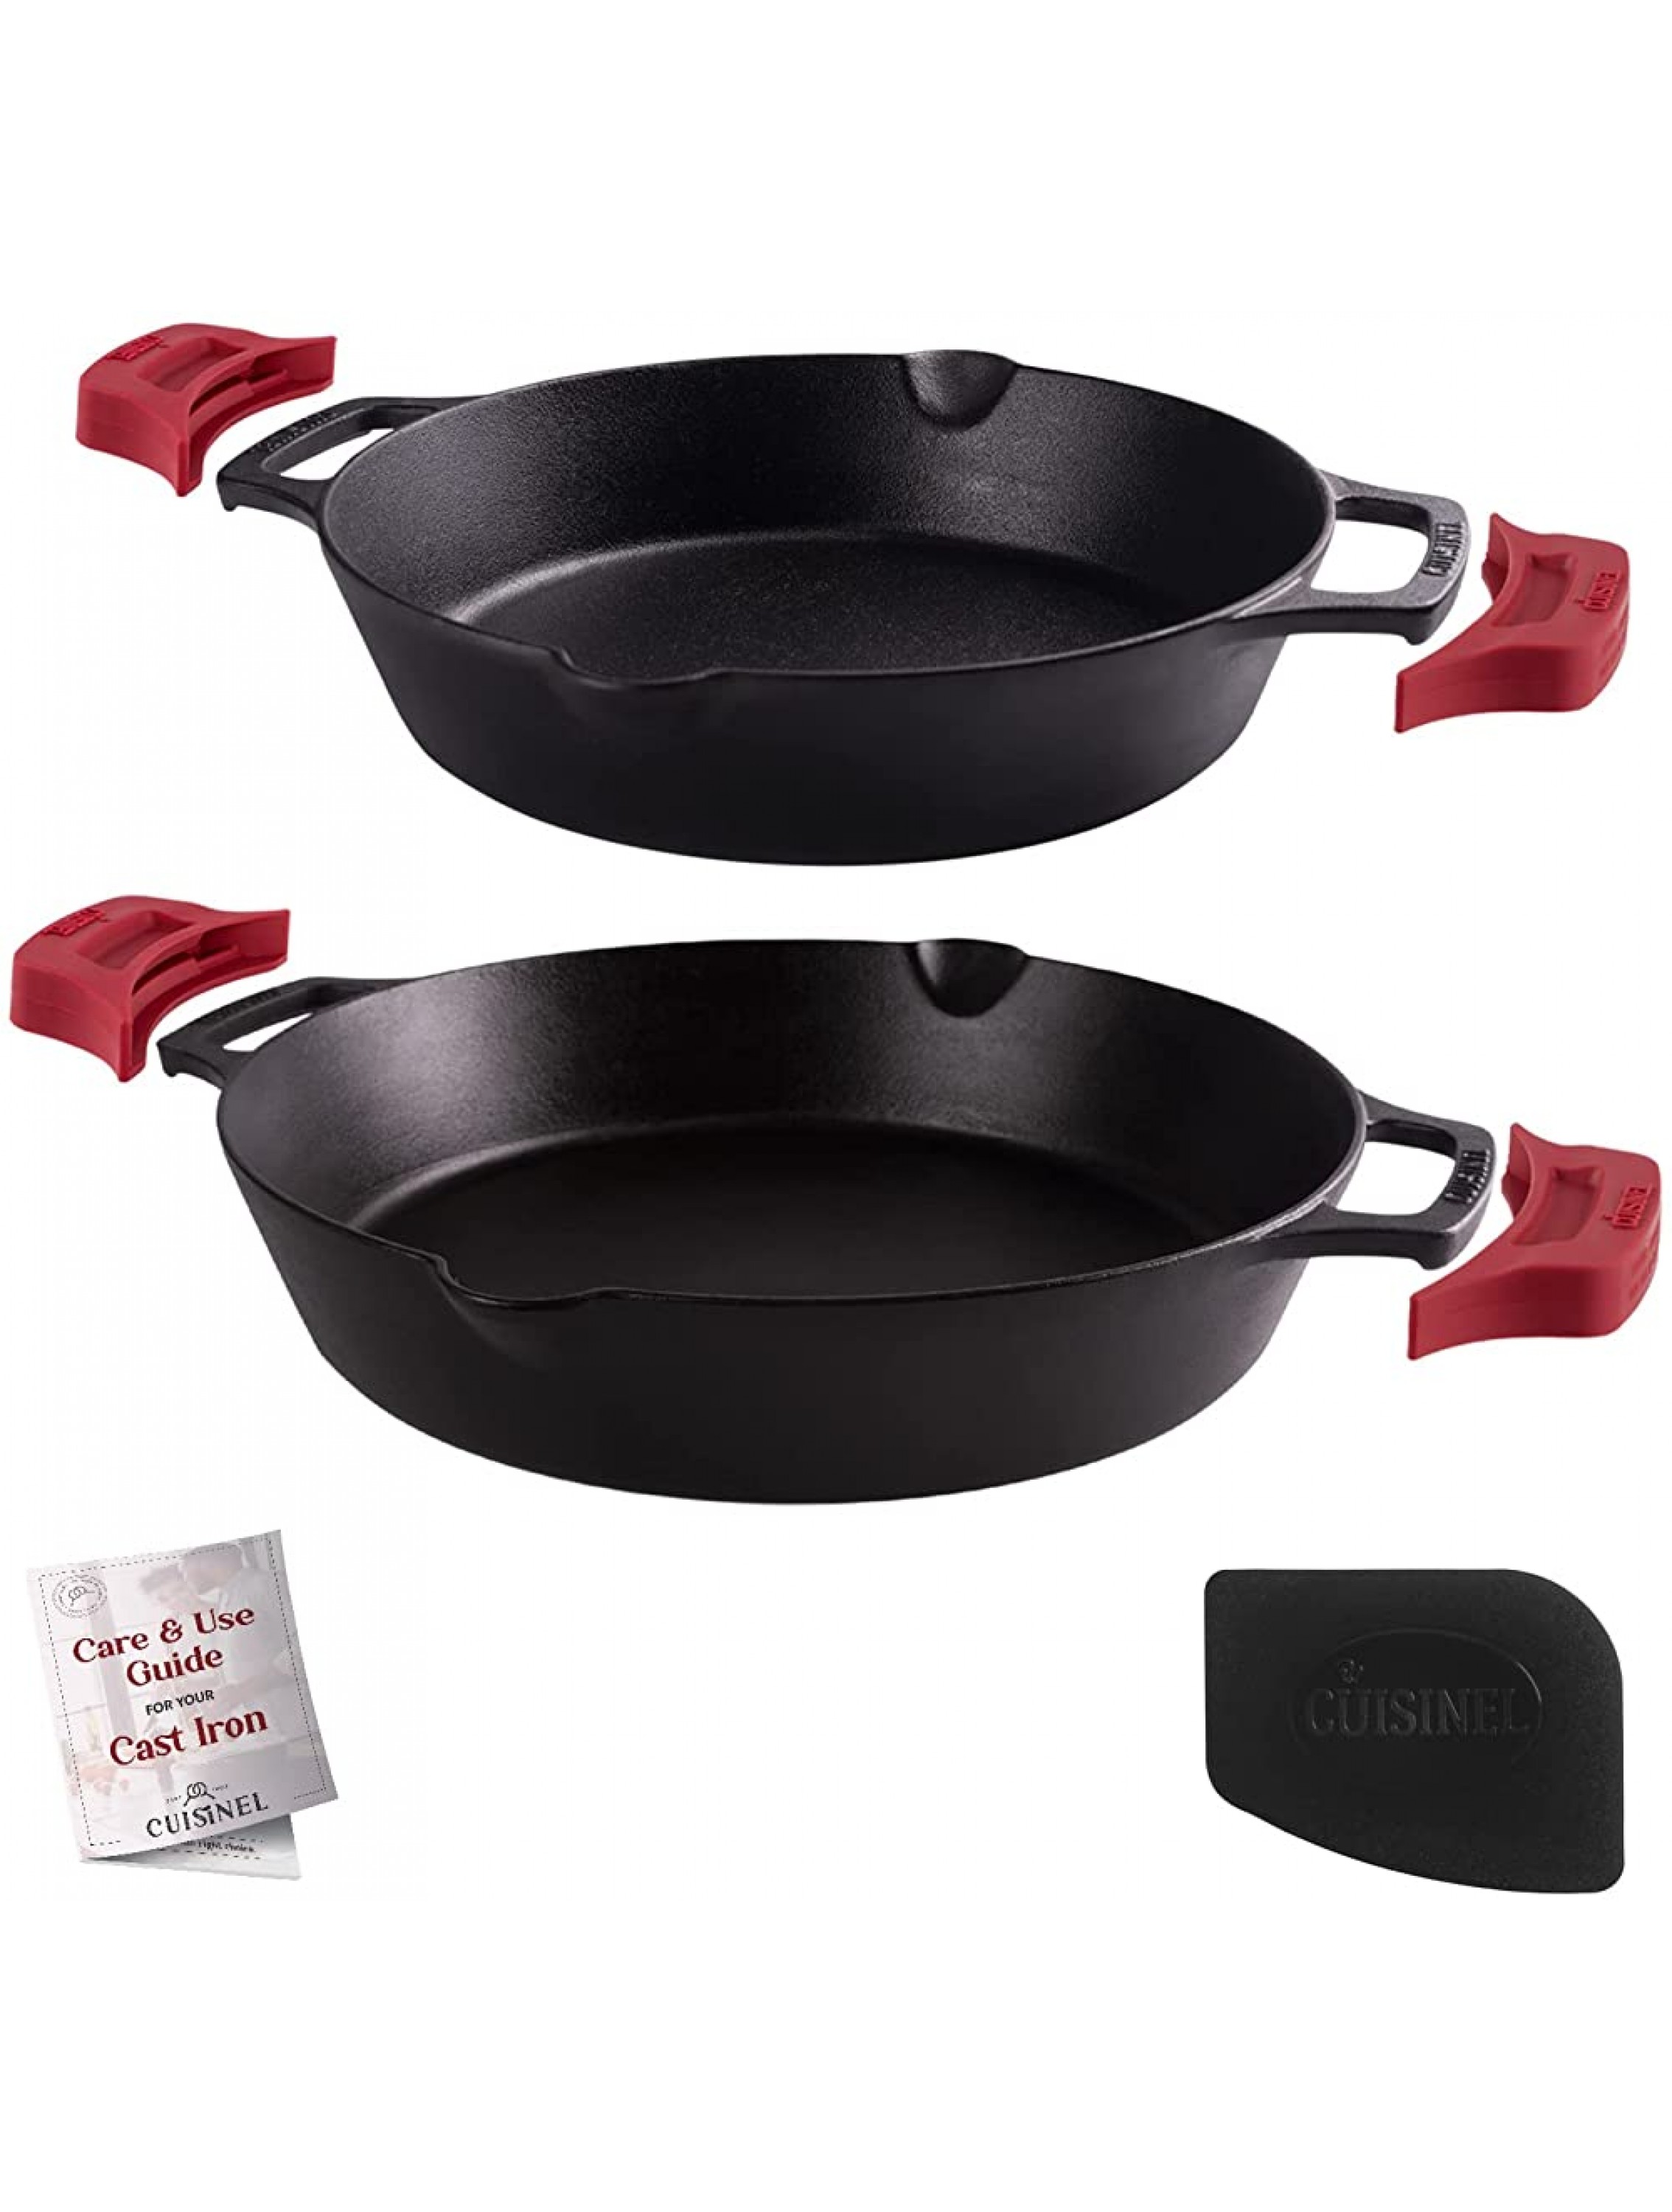 Cast Iron Skillet Set 10 + 12-Inch Dual Handle Frying Pans + Silicone Handle Holder Covers + Pan Scraper Pre-Seasoned Oven Grill Stovetop Induction Safe Kitchen Cookware Indoor Outdoor Use - B7HQKWCBC